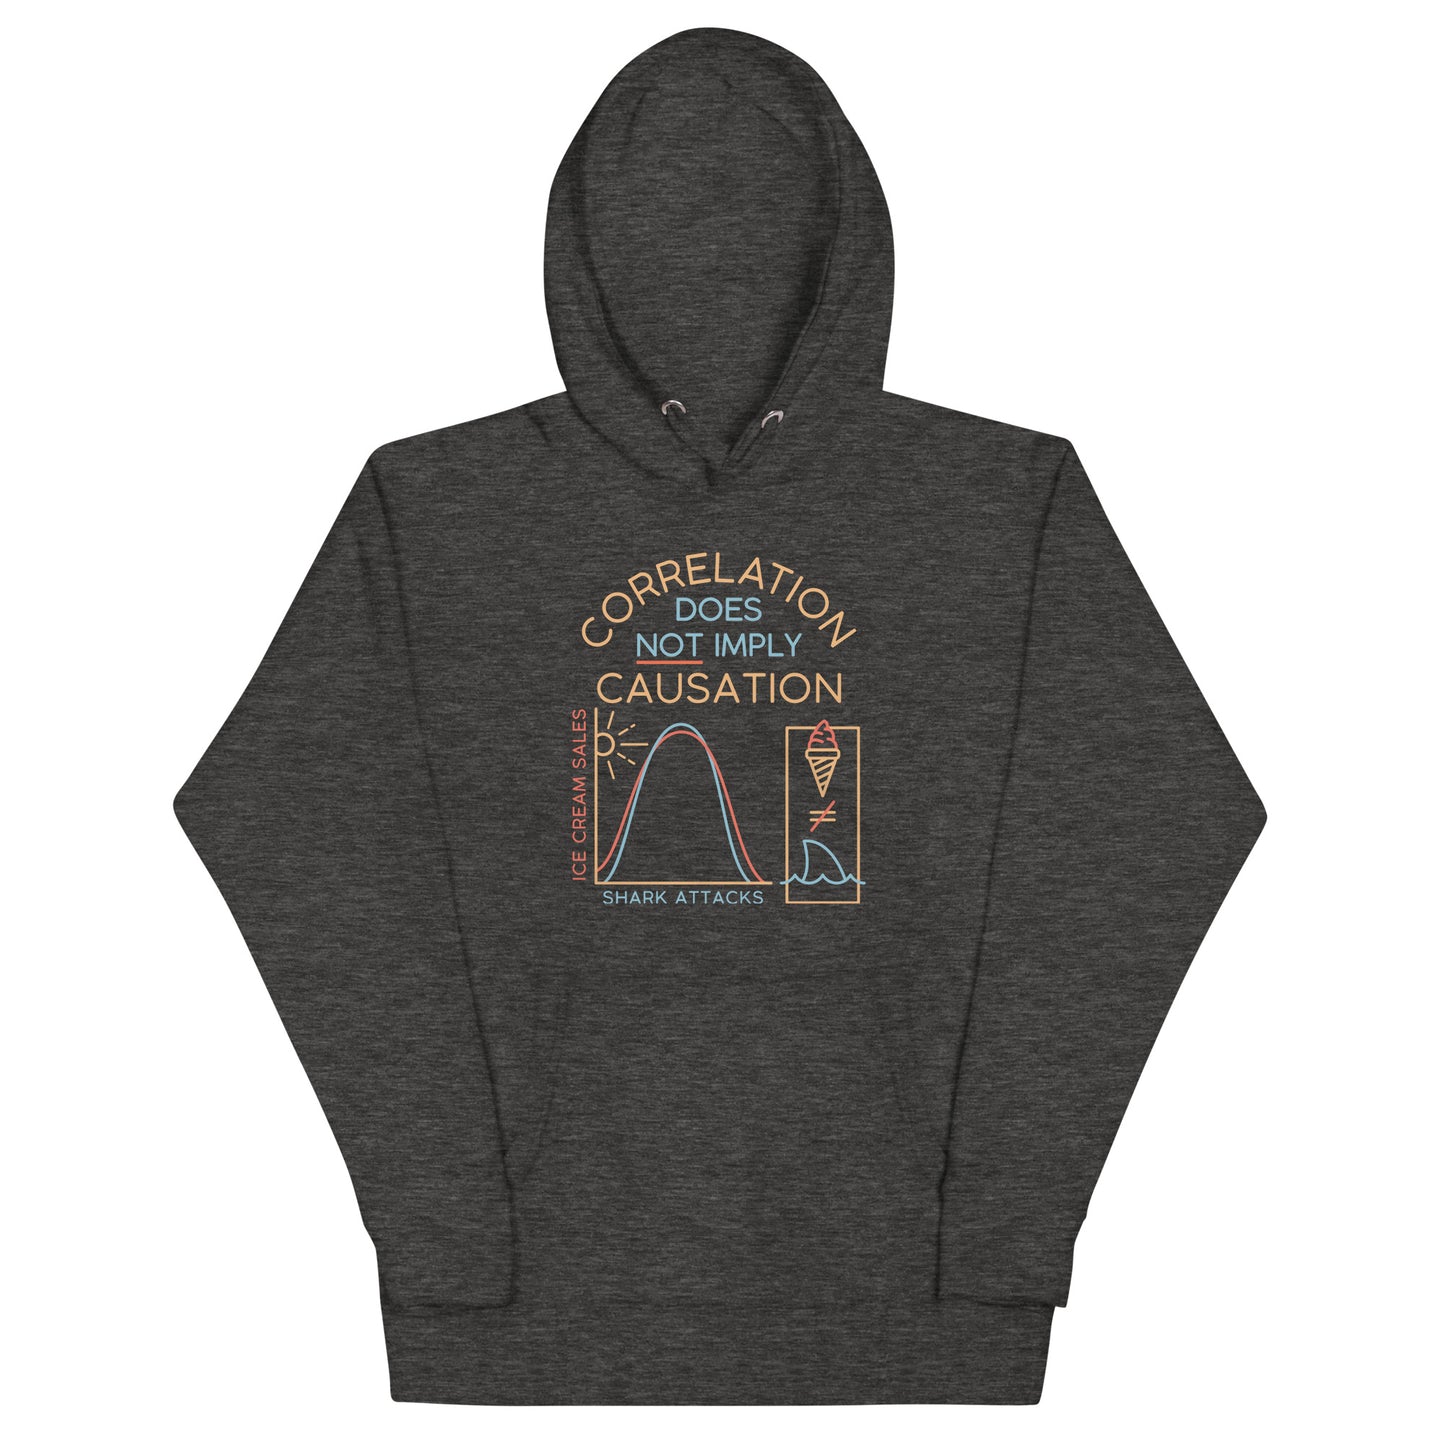 Correlation Does Not Imply Causation Unisex Hoodie